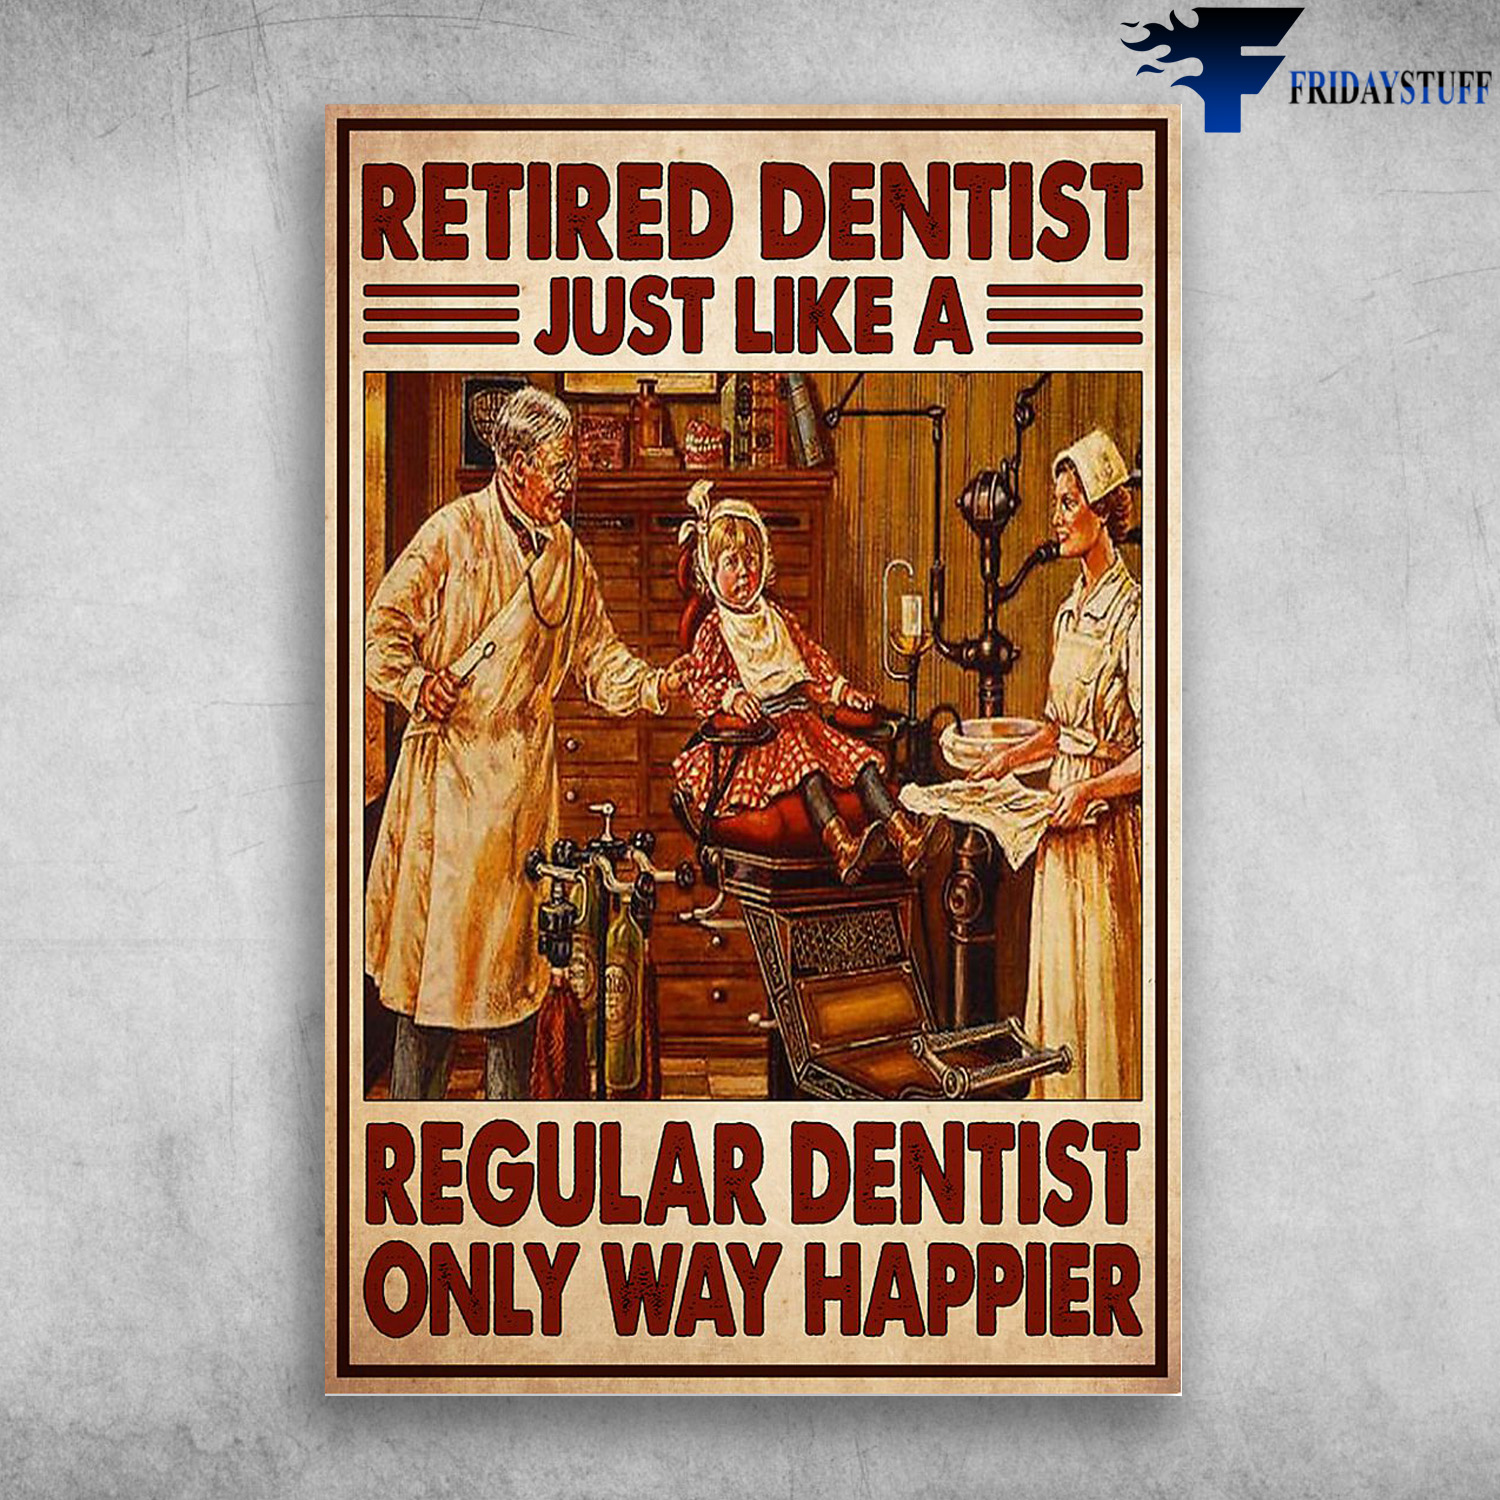 Dentist And Patient - Retired Dentist Just Like A Regular Dentist Only Way Happier